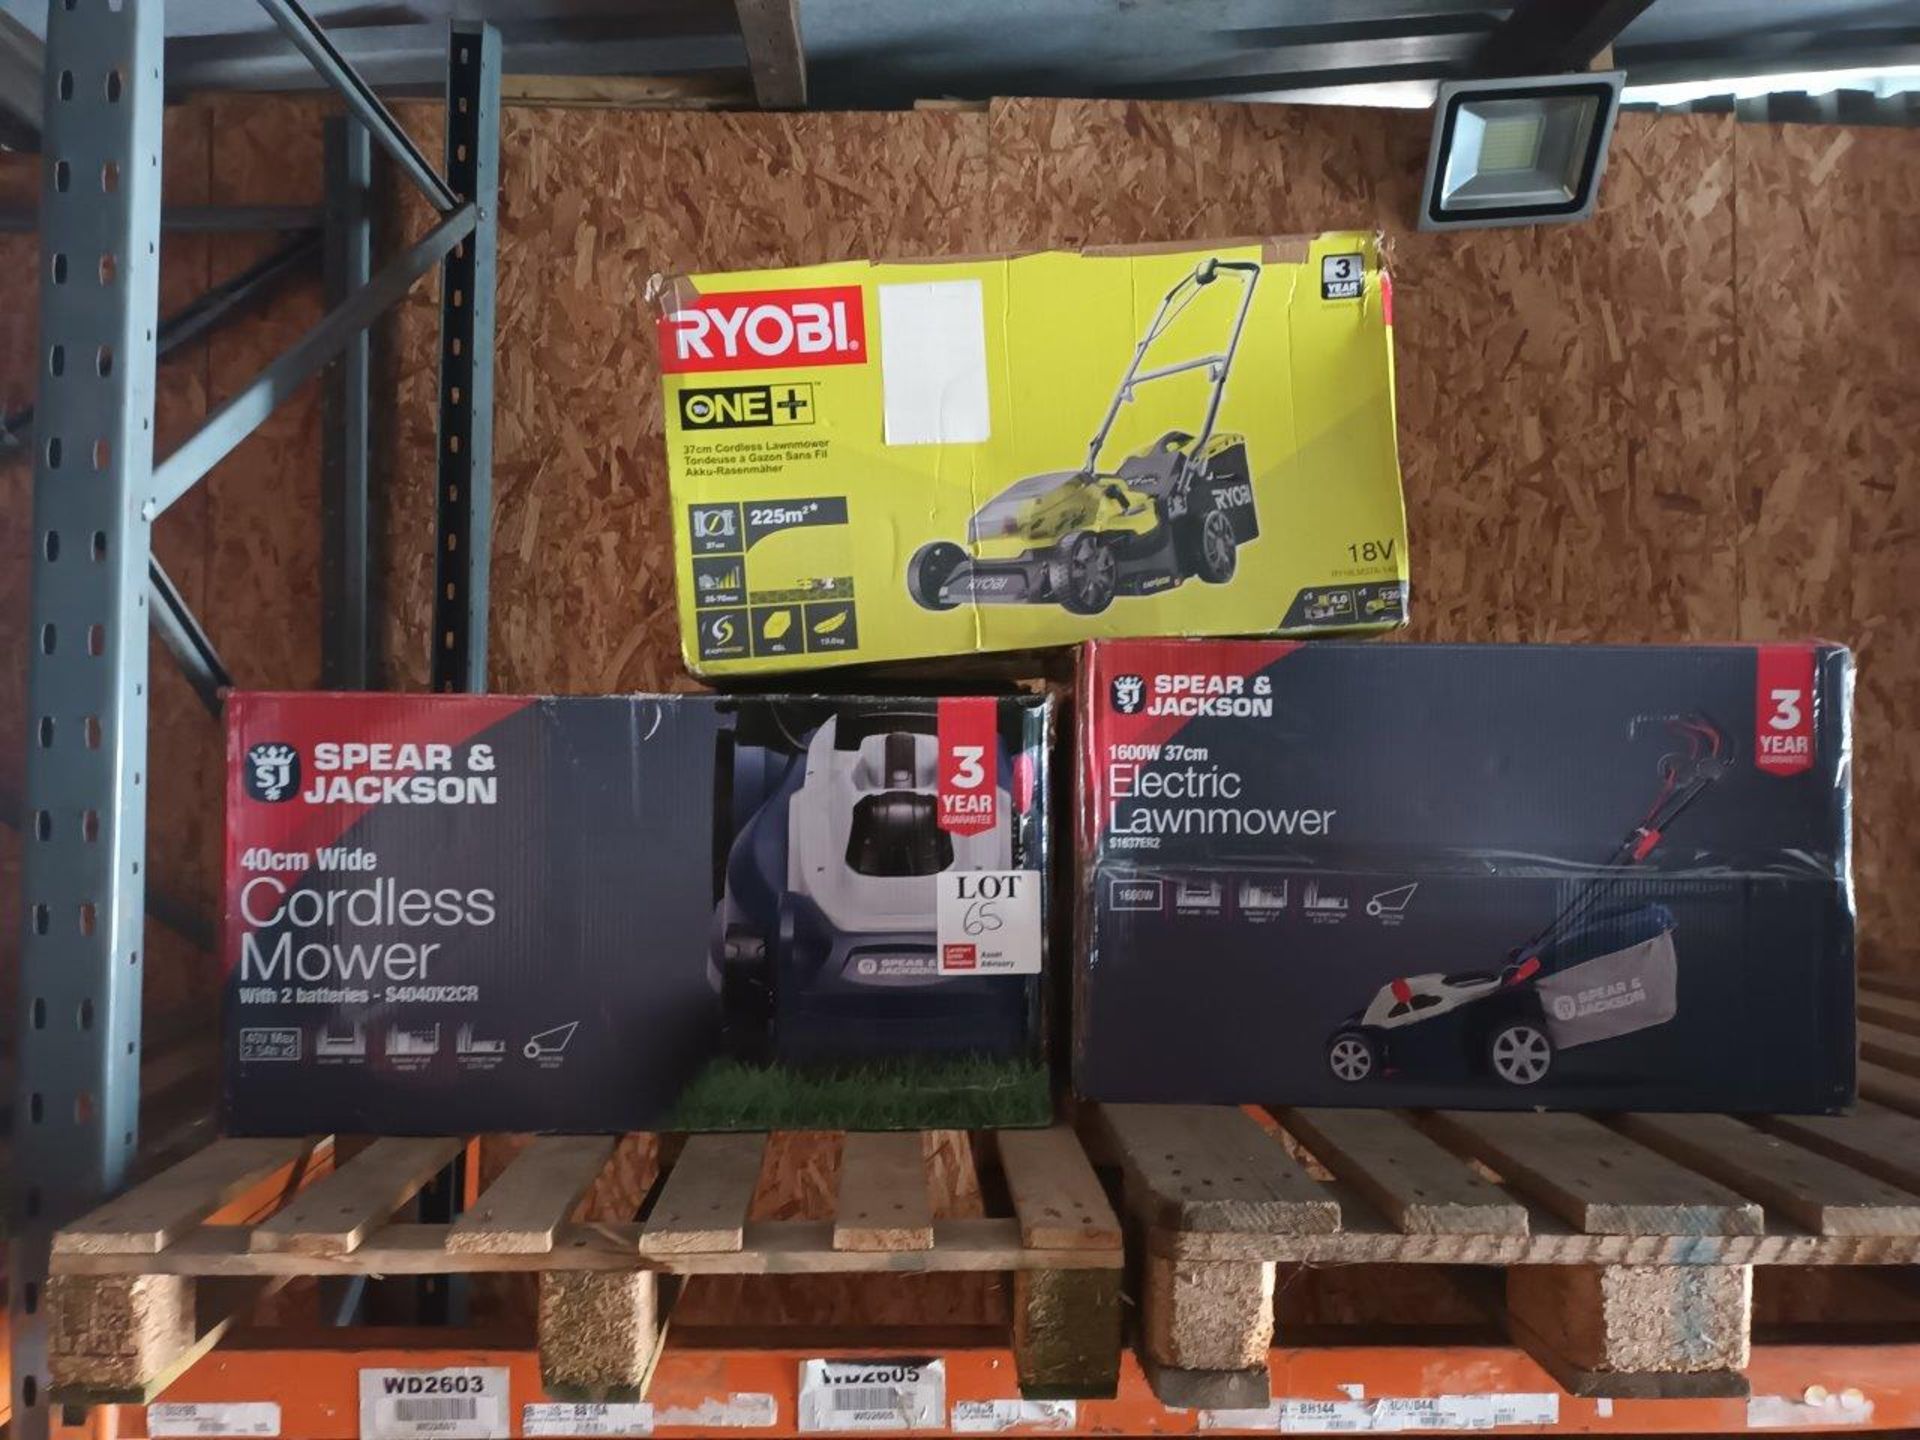 Spear and Jackson electric lawnmower, Spear and Jackson cordless mower and Ryobi cordless lawnmower